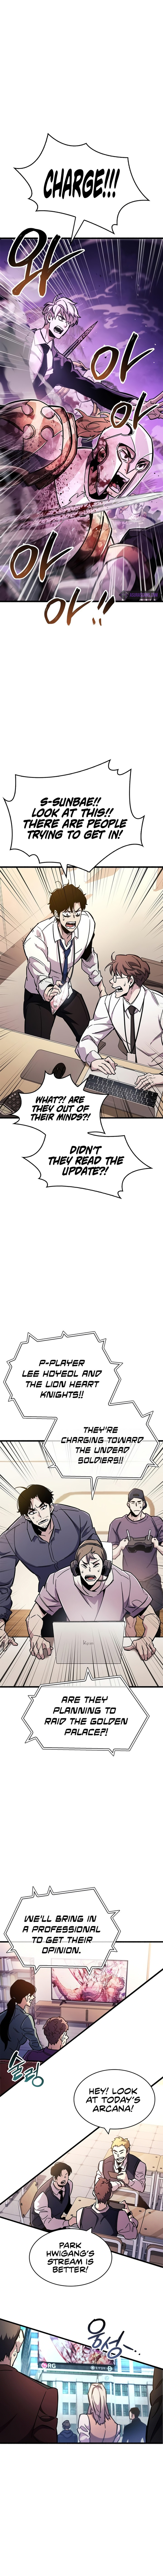 The Player Hides His Past Chapter 25 Page 11